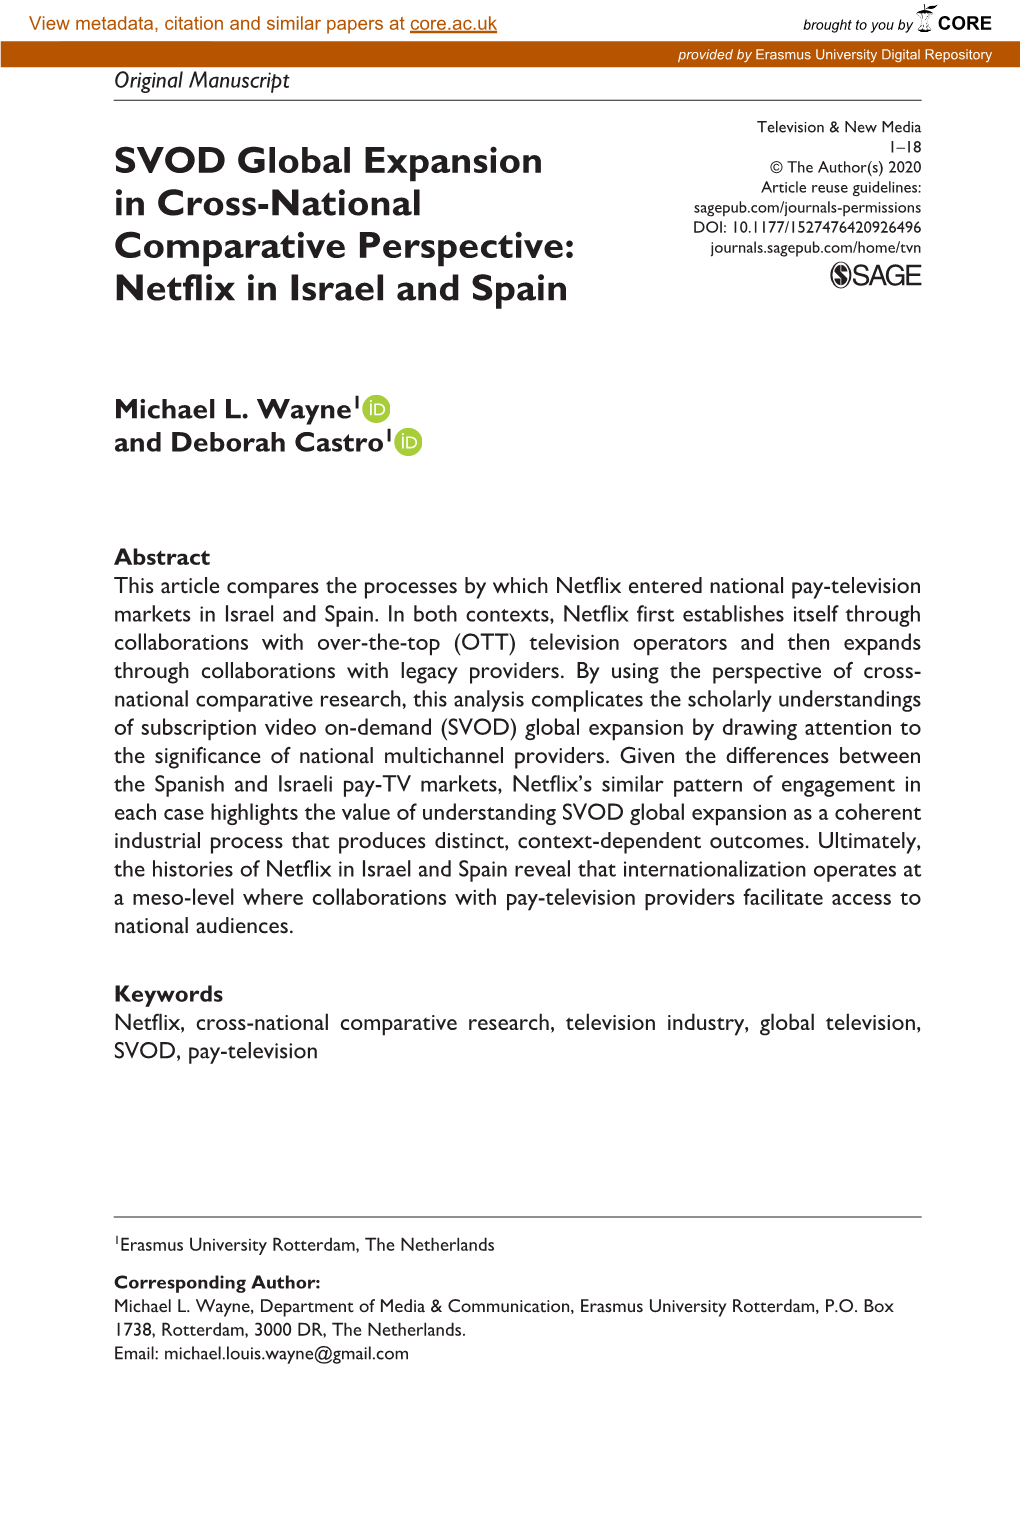 SVOD Global Expansion in Cross-National Comparative